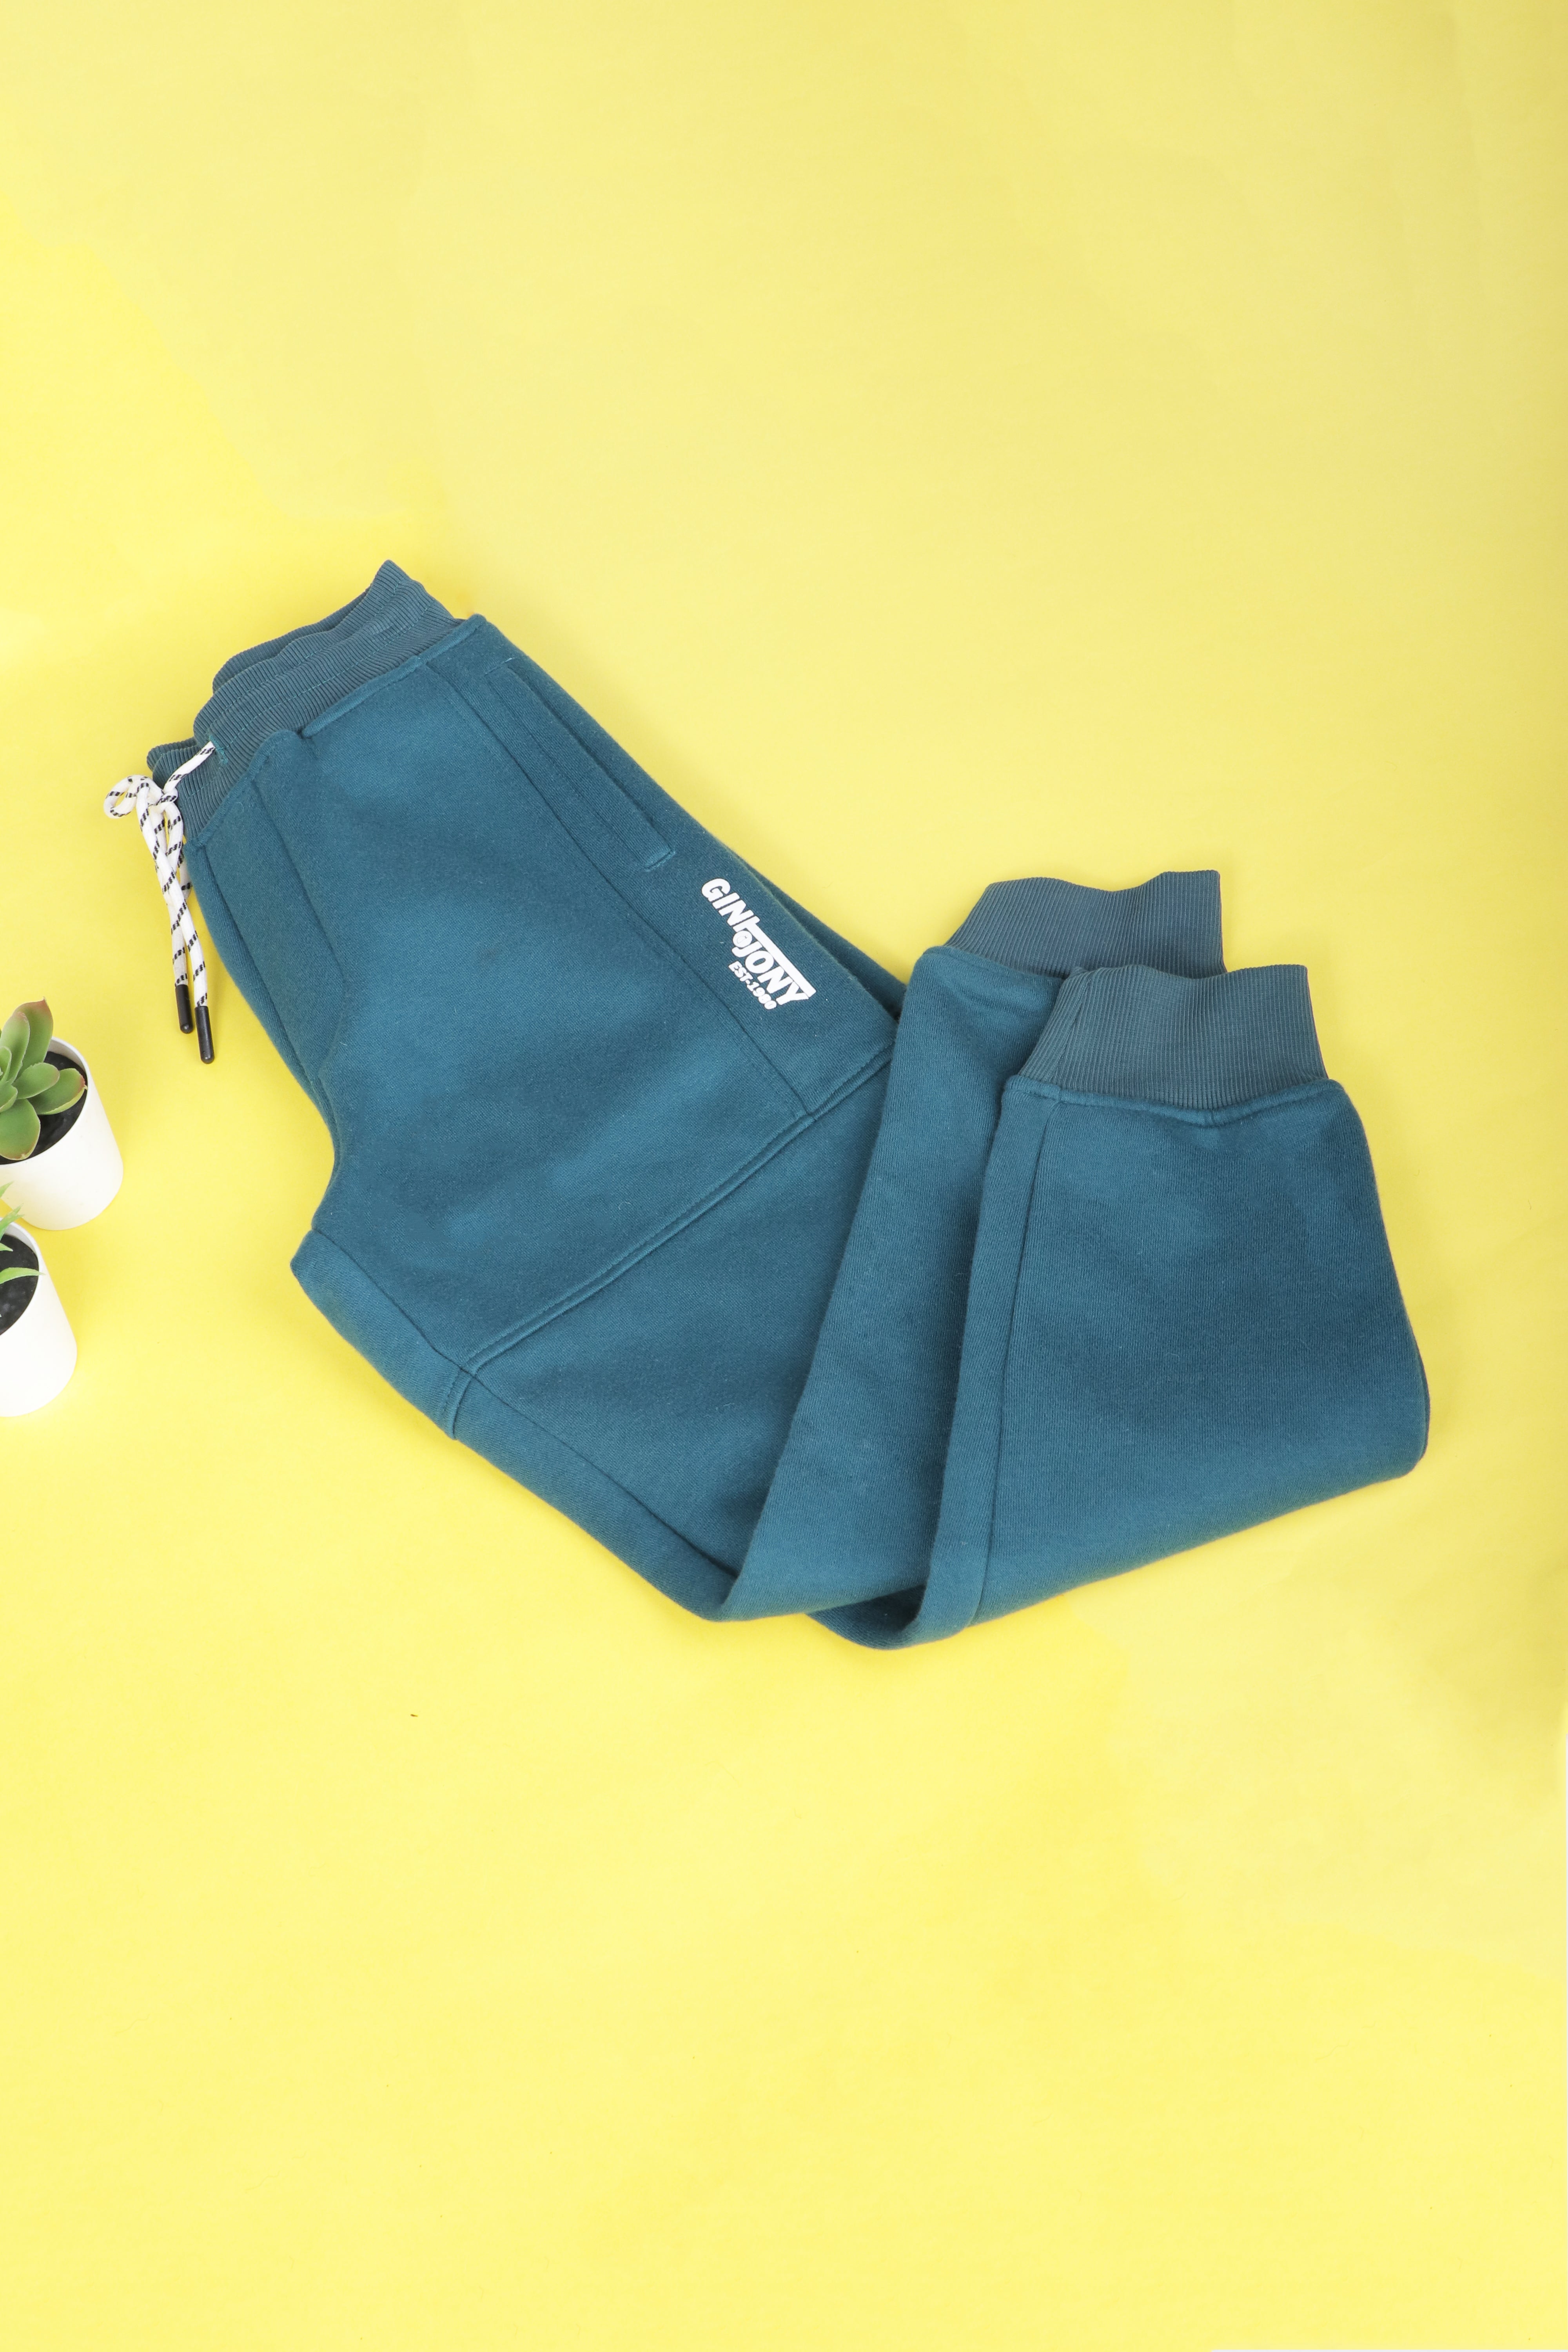 Boys Green Solid Knits Track Pant